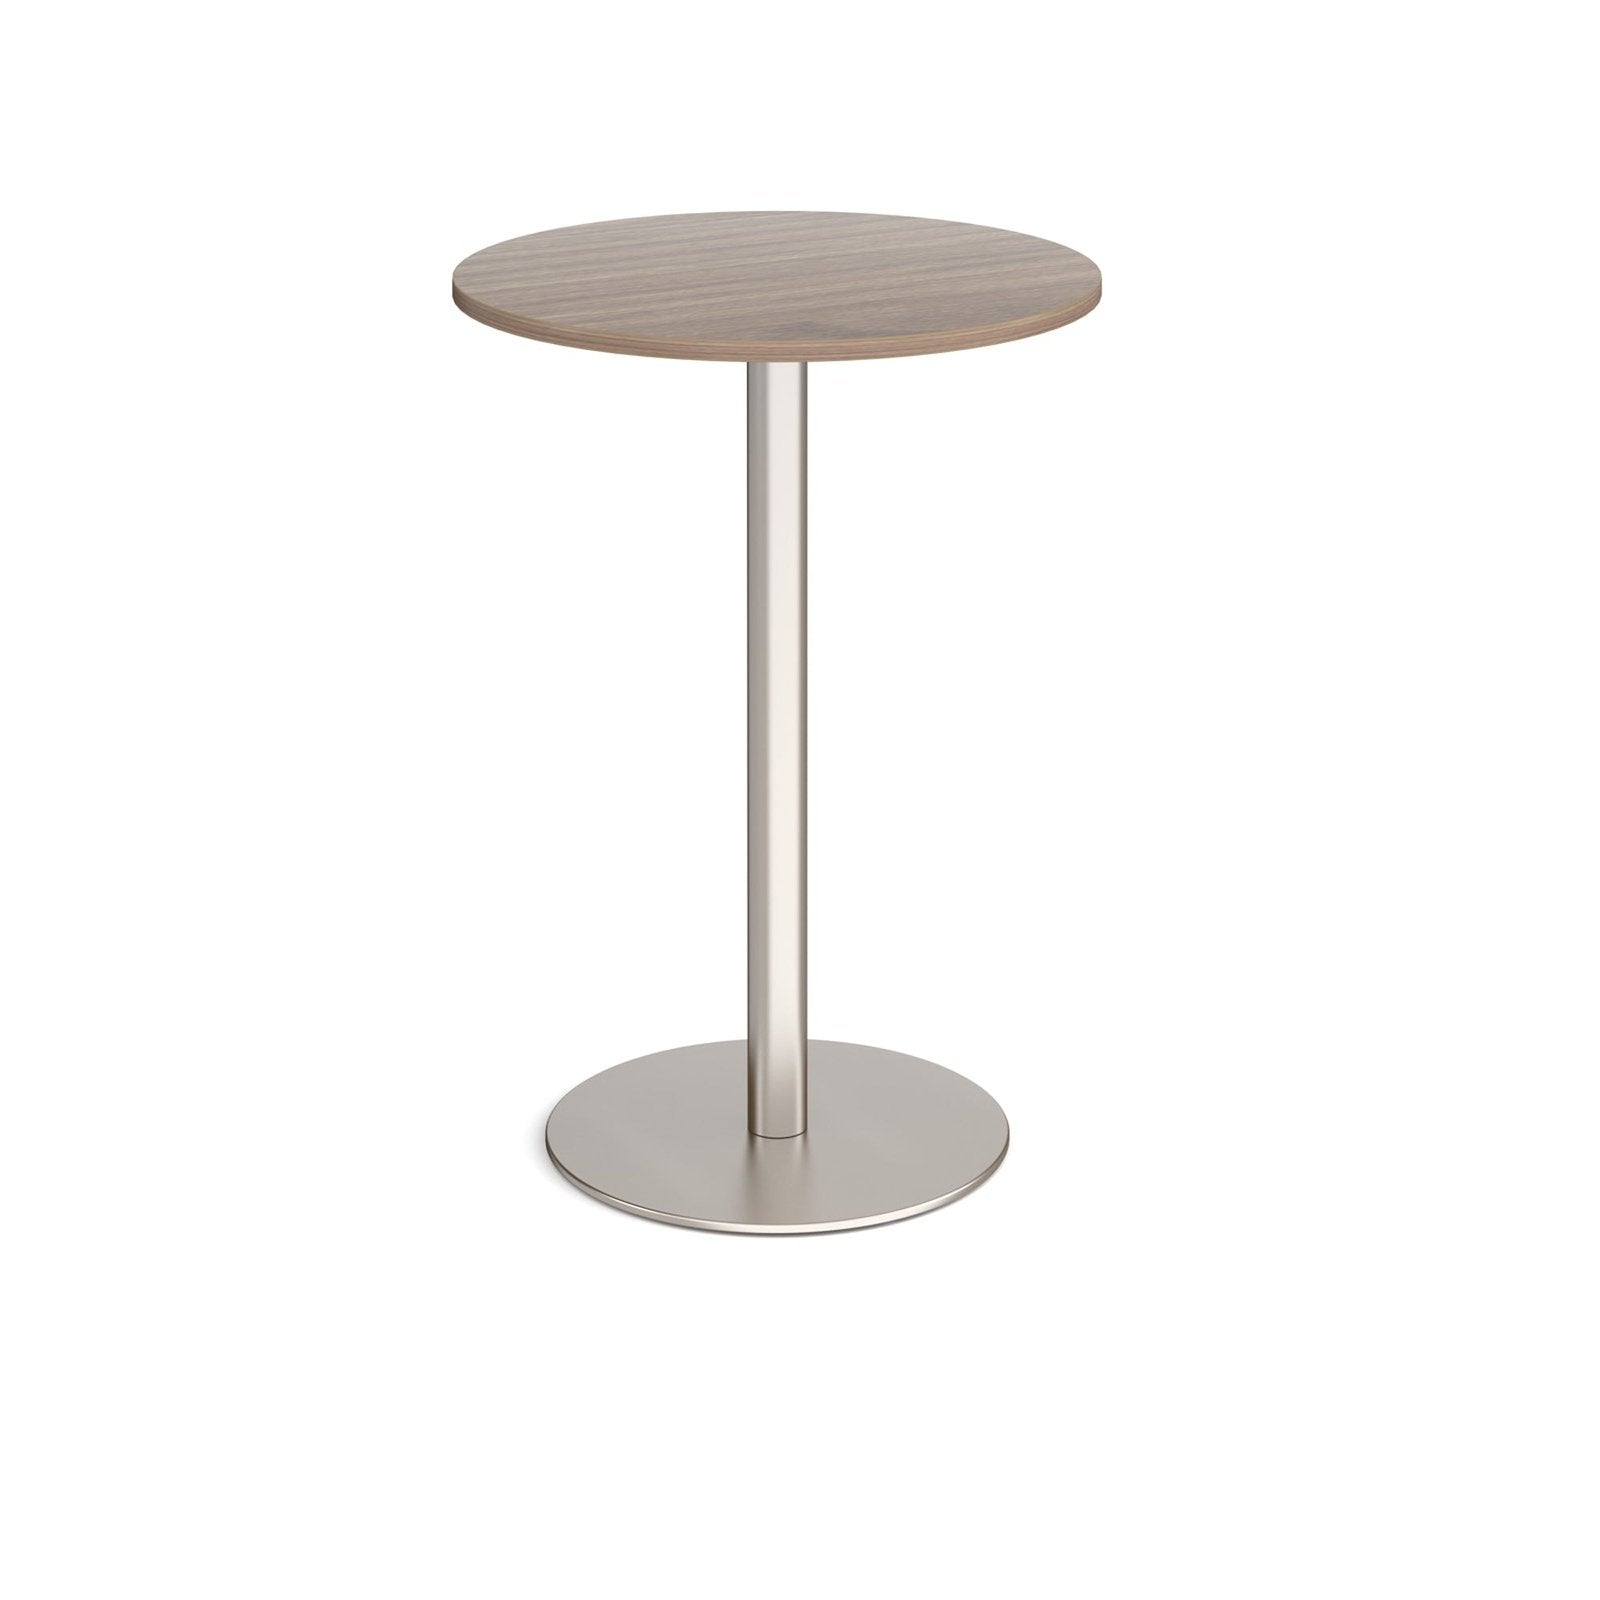 Monza circular poseur table with flat round base - Office Products Online